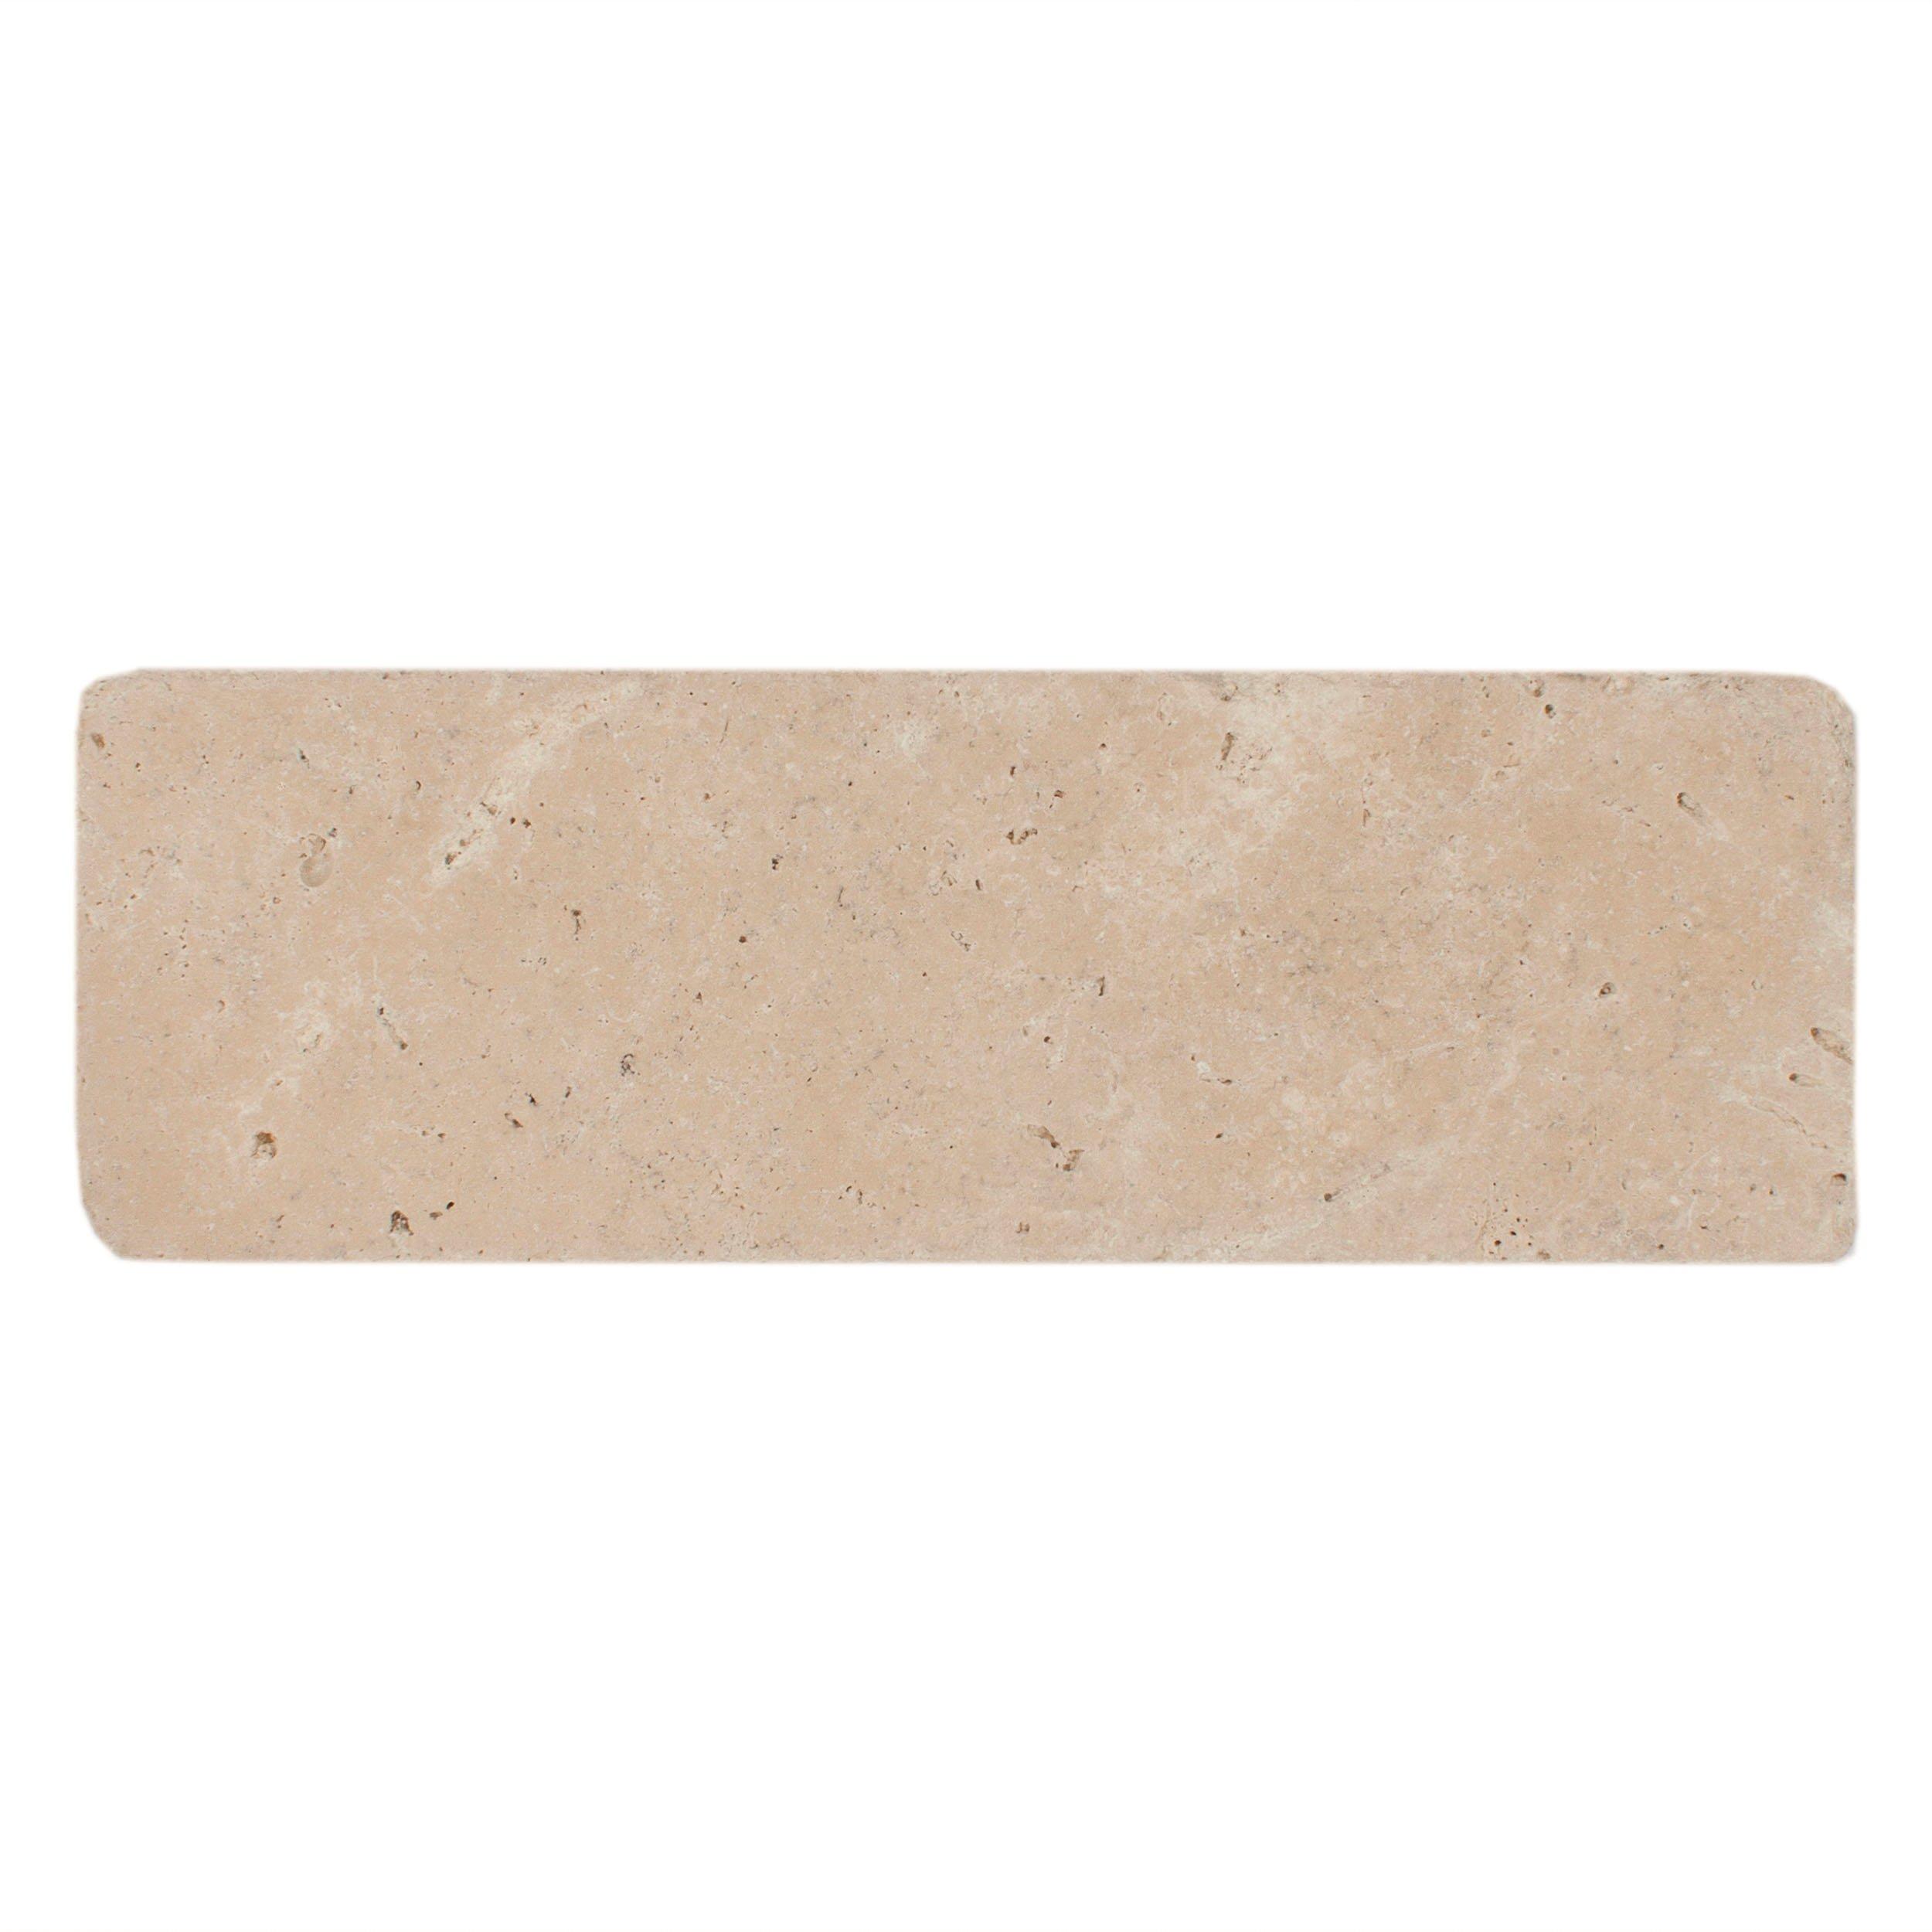 Country Beige Tumbled Travertine Tile